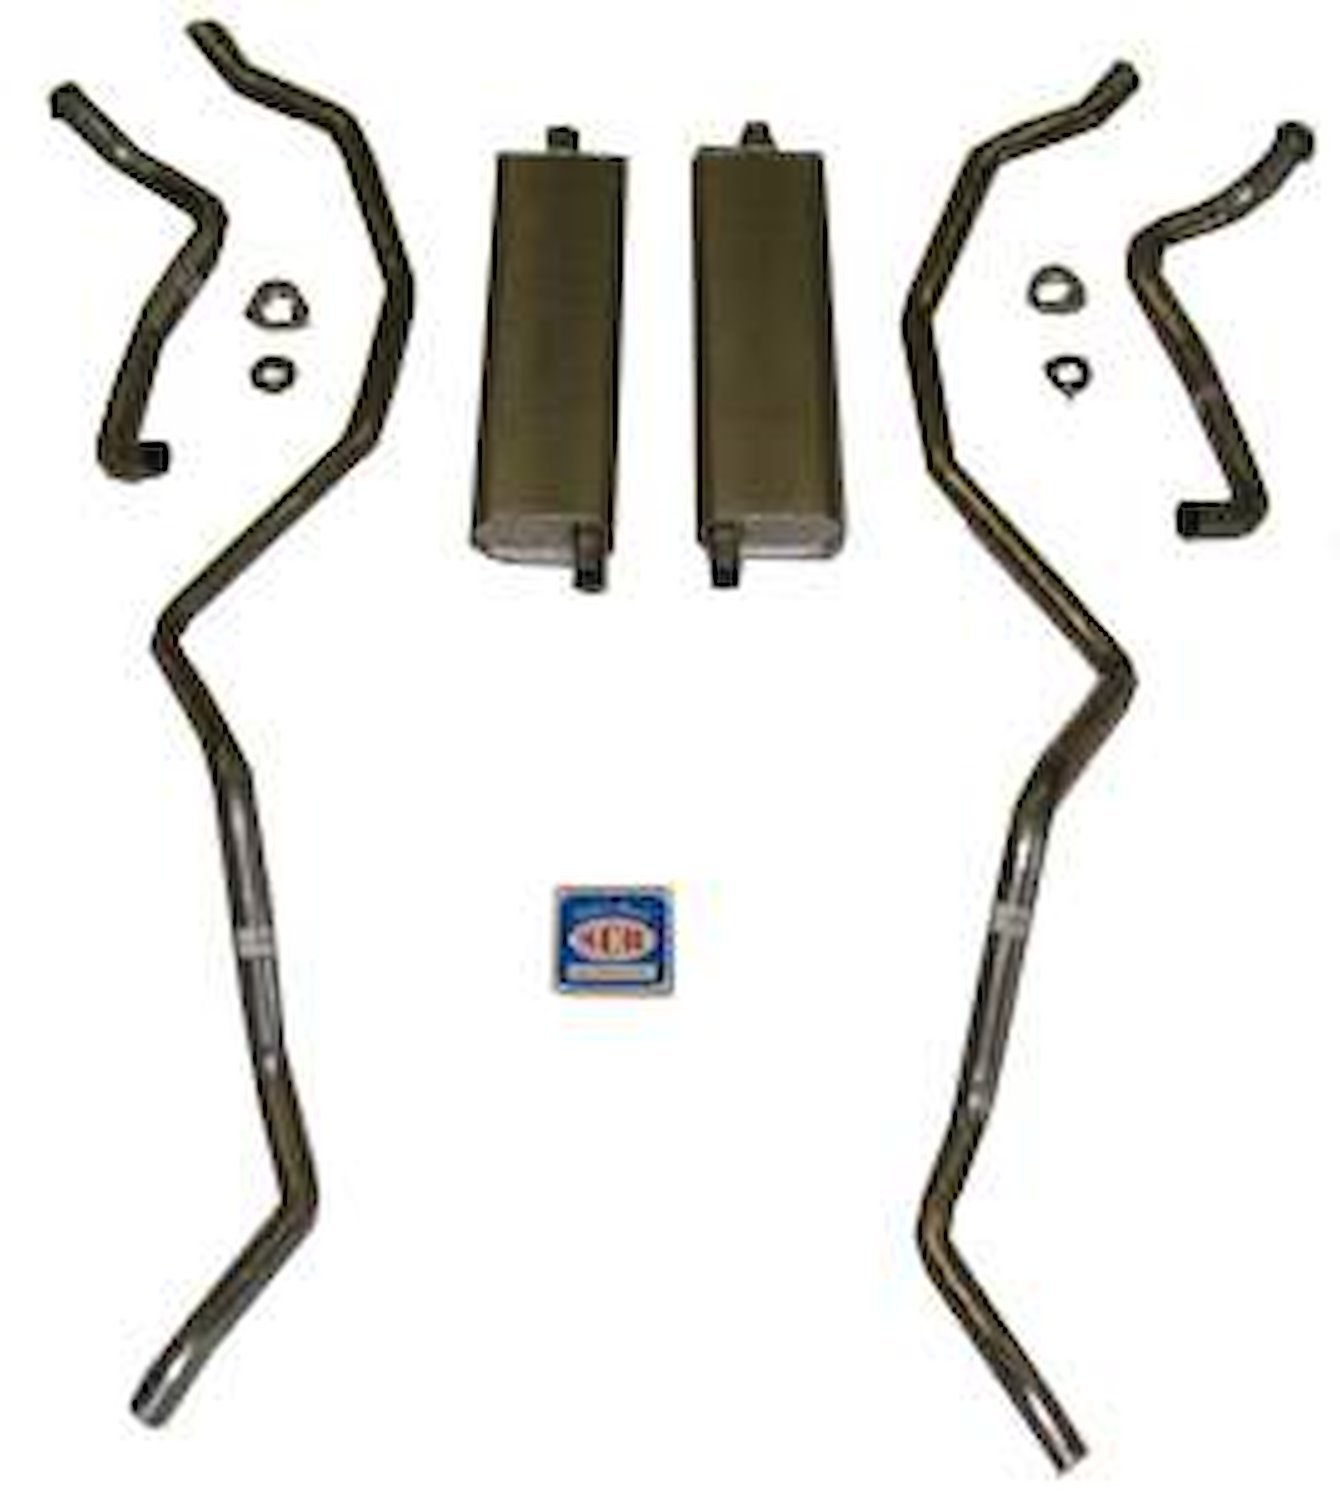 73005S 1960-1961 Chevrolet Full-Size 8-cyl 348 Dual Exhaust System, 304 Stainless Steel